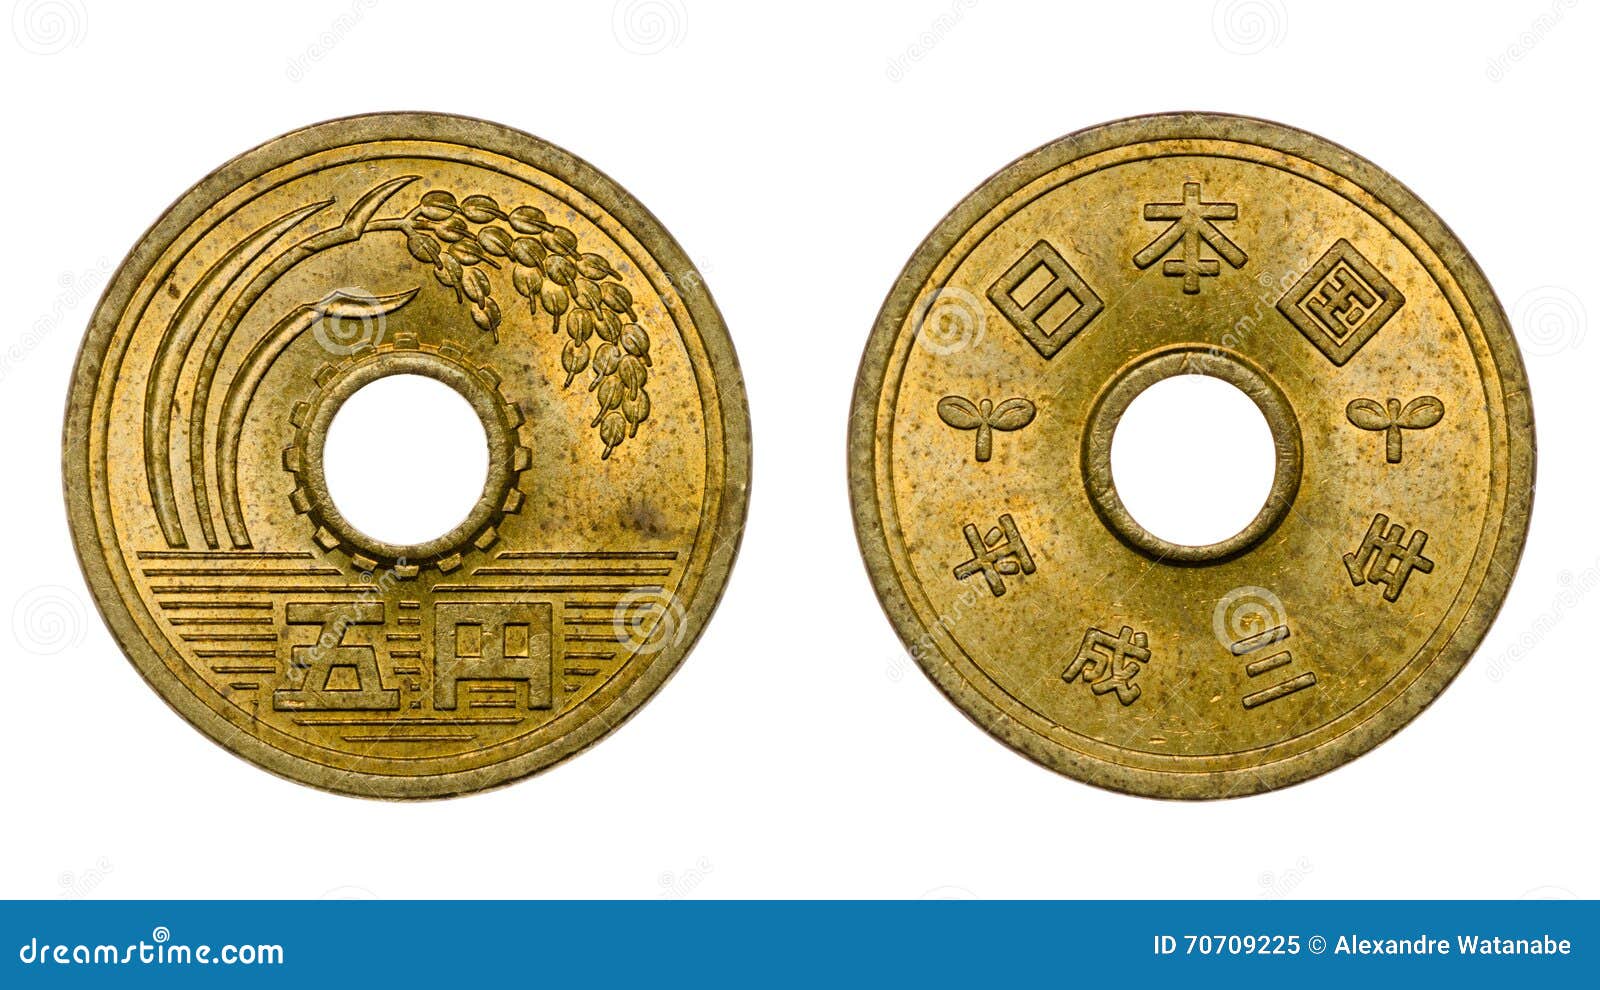 Five Japanese Yen Coin Front And Back Faces Stock Image - Image of financia...